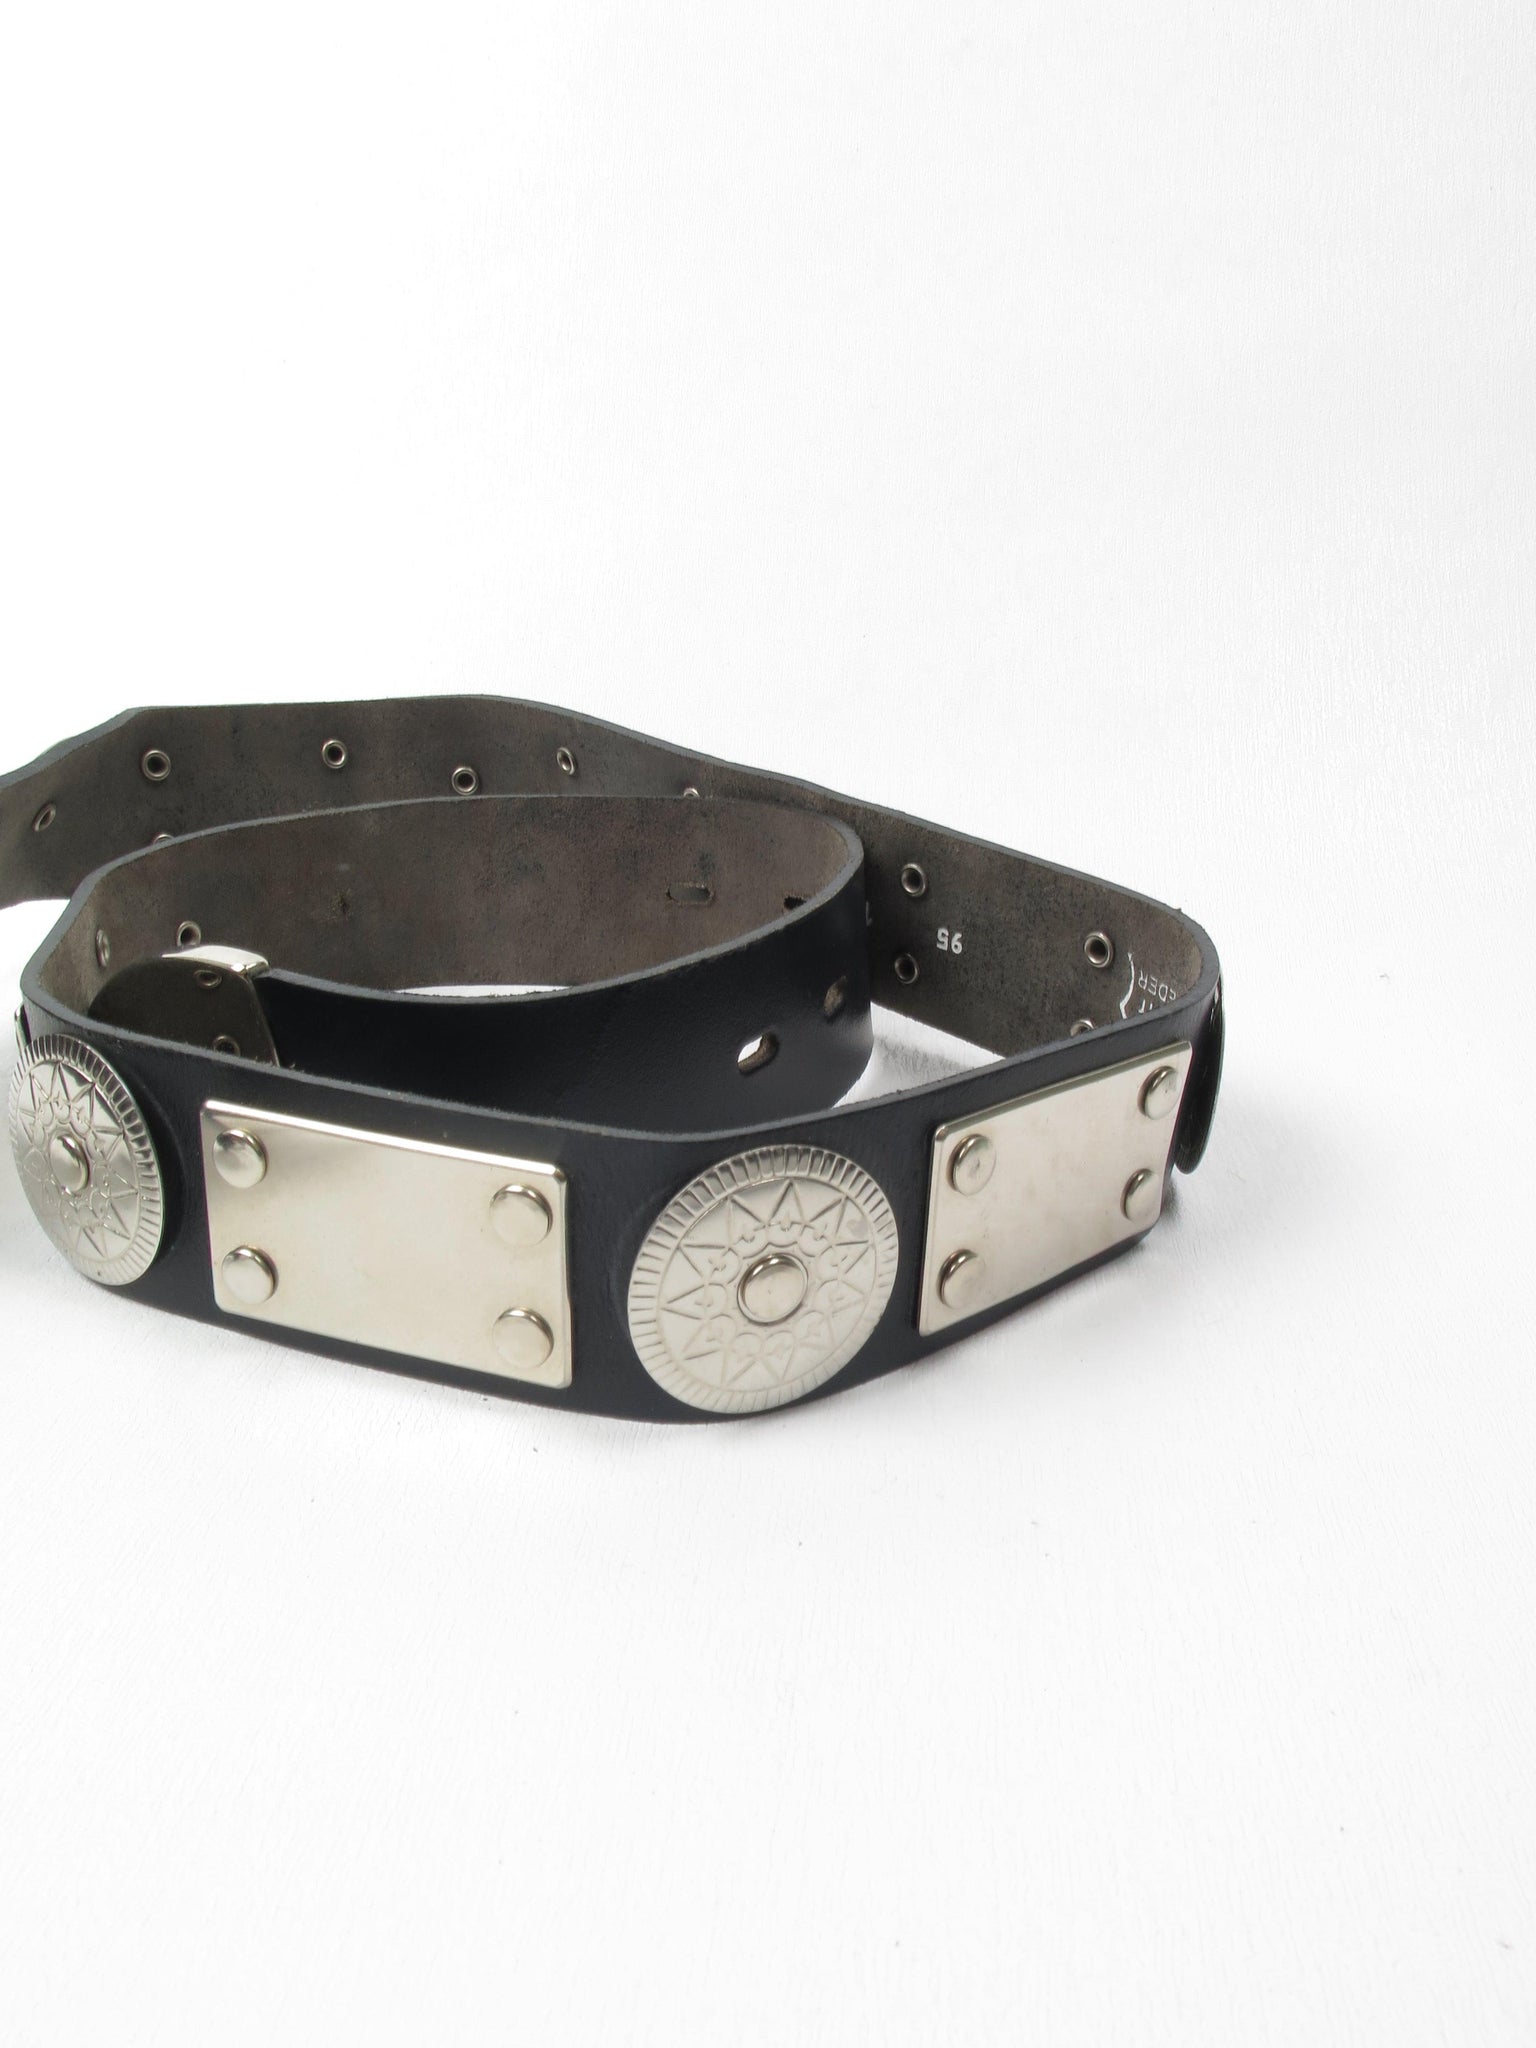 Black Leather Vintage Belt With Silver Metal Pieces M/L - The Harlequin